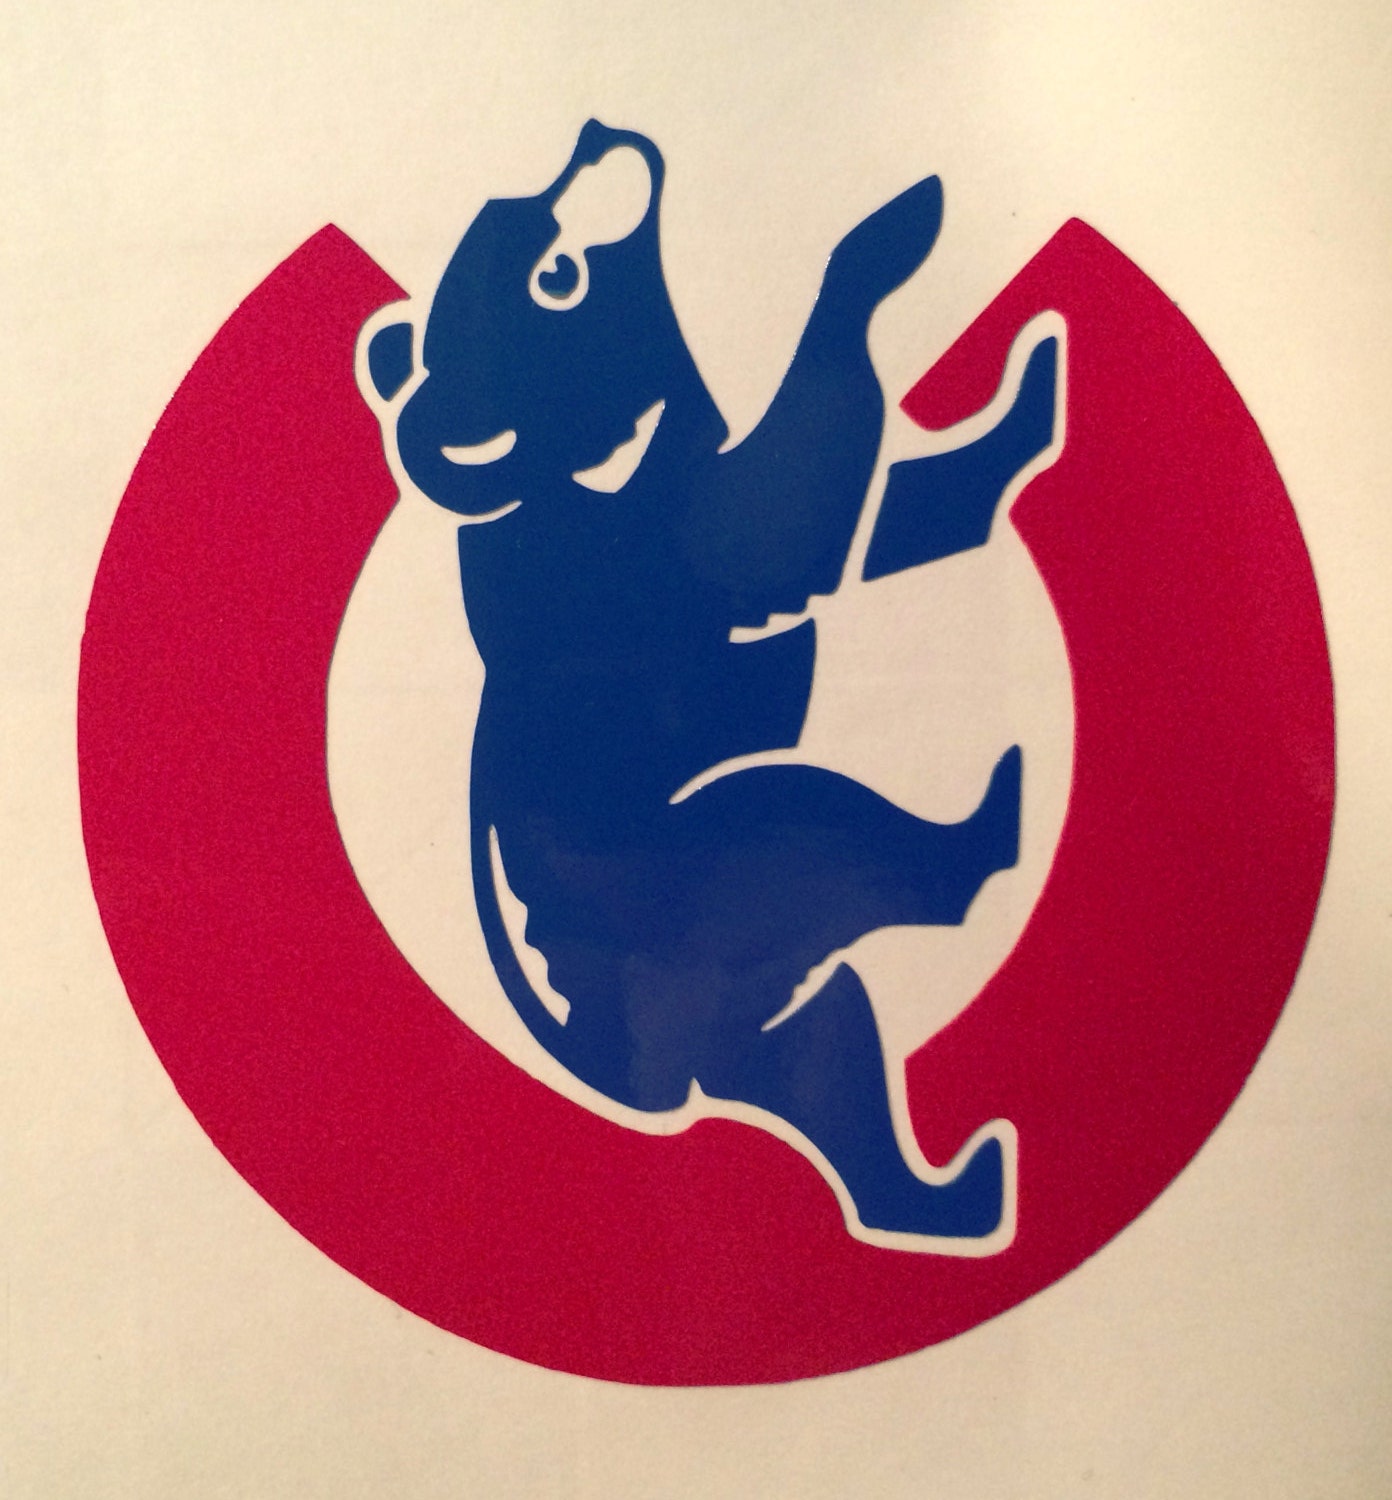 Chicago Cubs Cubby Bear sticker/decal from VinylAwesome on Etsy Studio